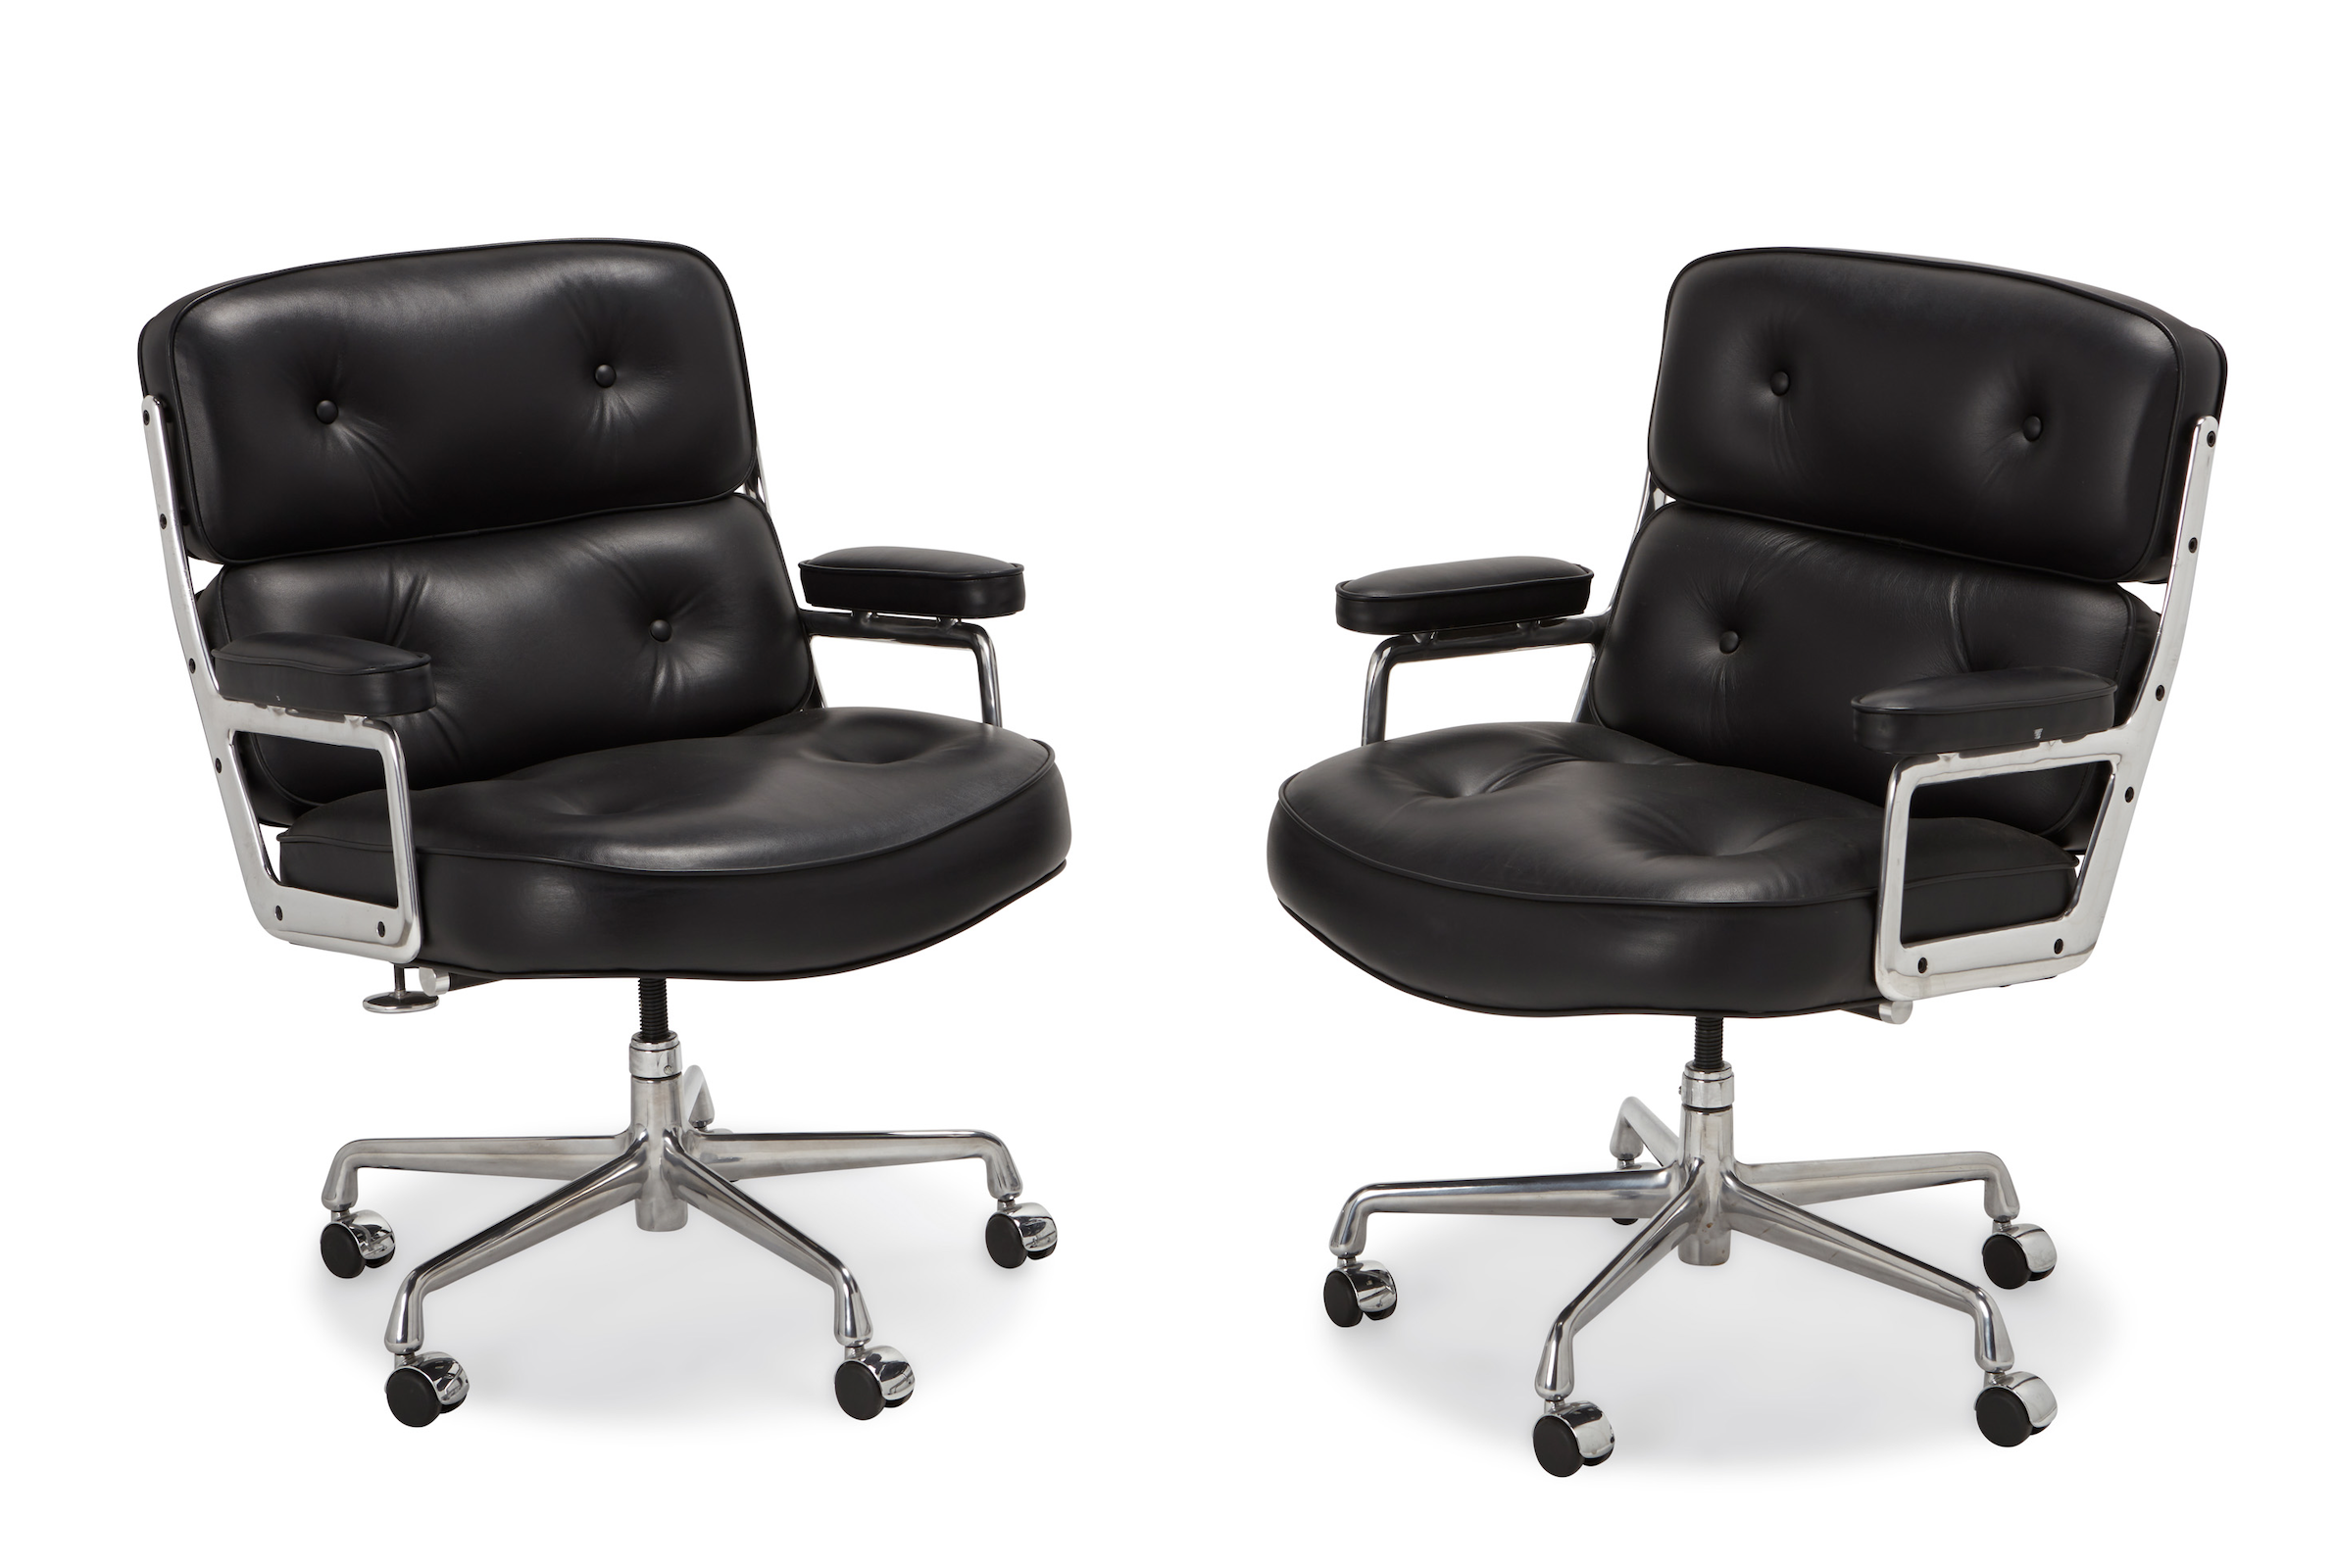 Ray and Charles Eames Time Life desk chairs for Herman Miller, from 2017, $3,575